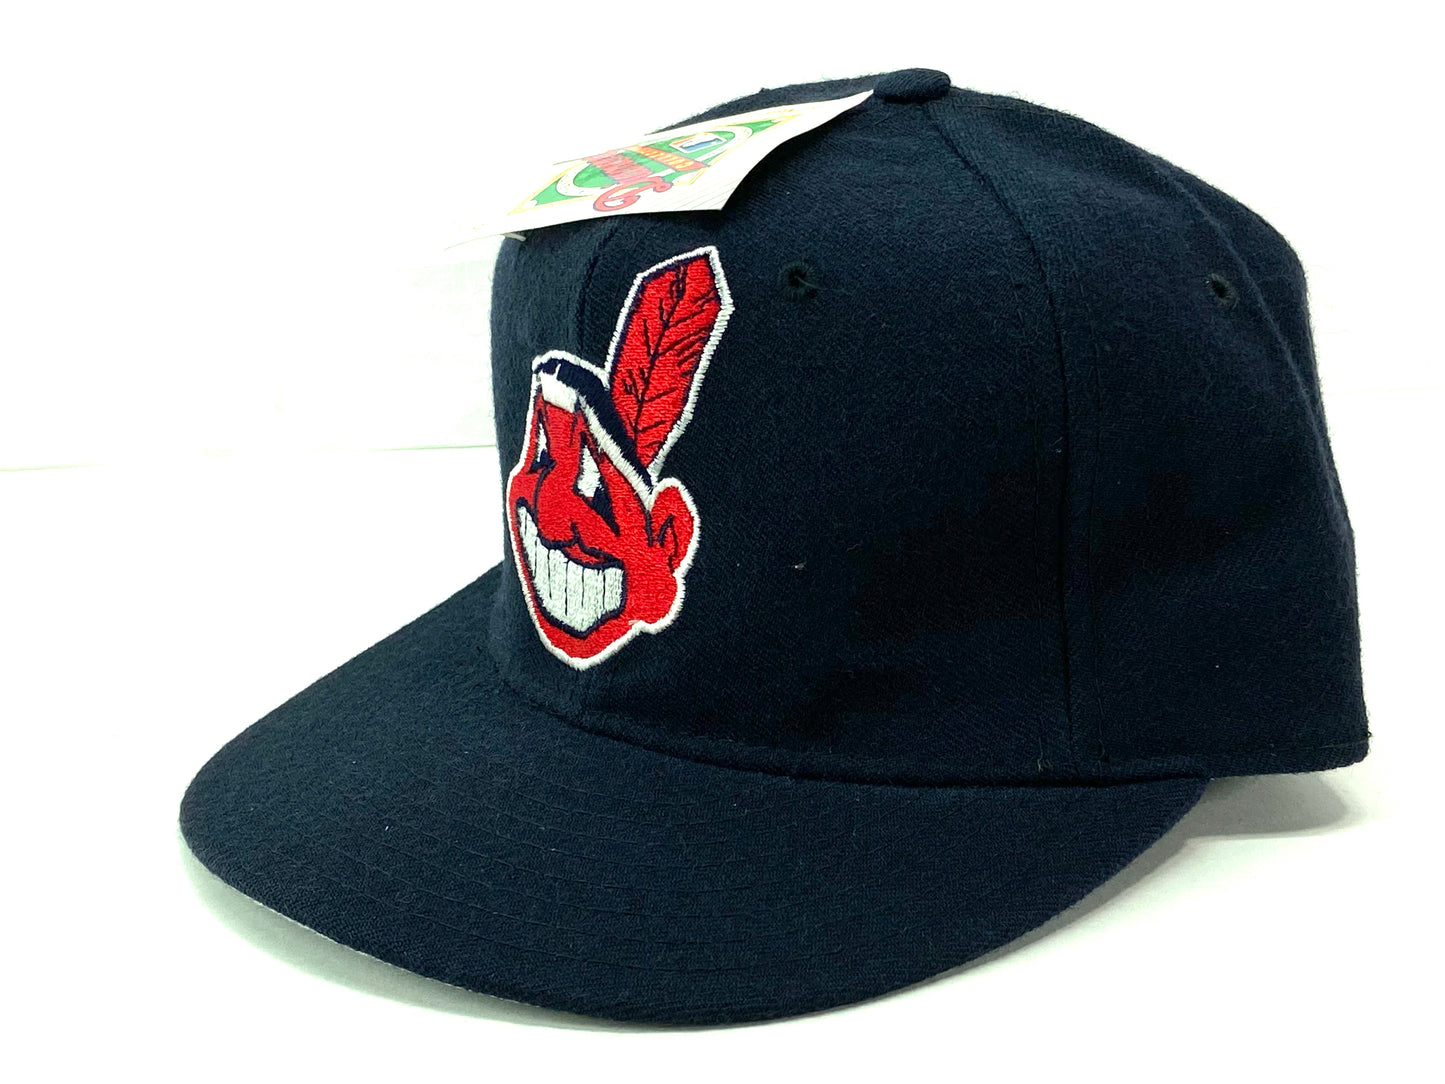 Cleveland Indians Vintage MLB Fitted 100% Wool Hat By New Era